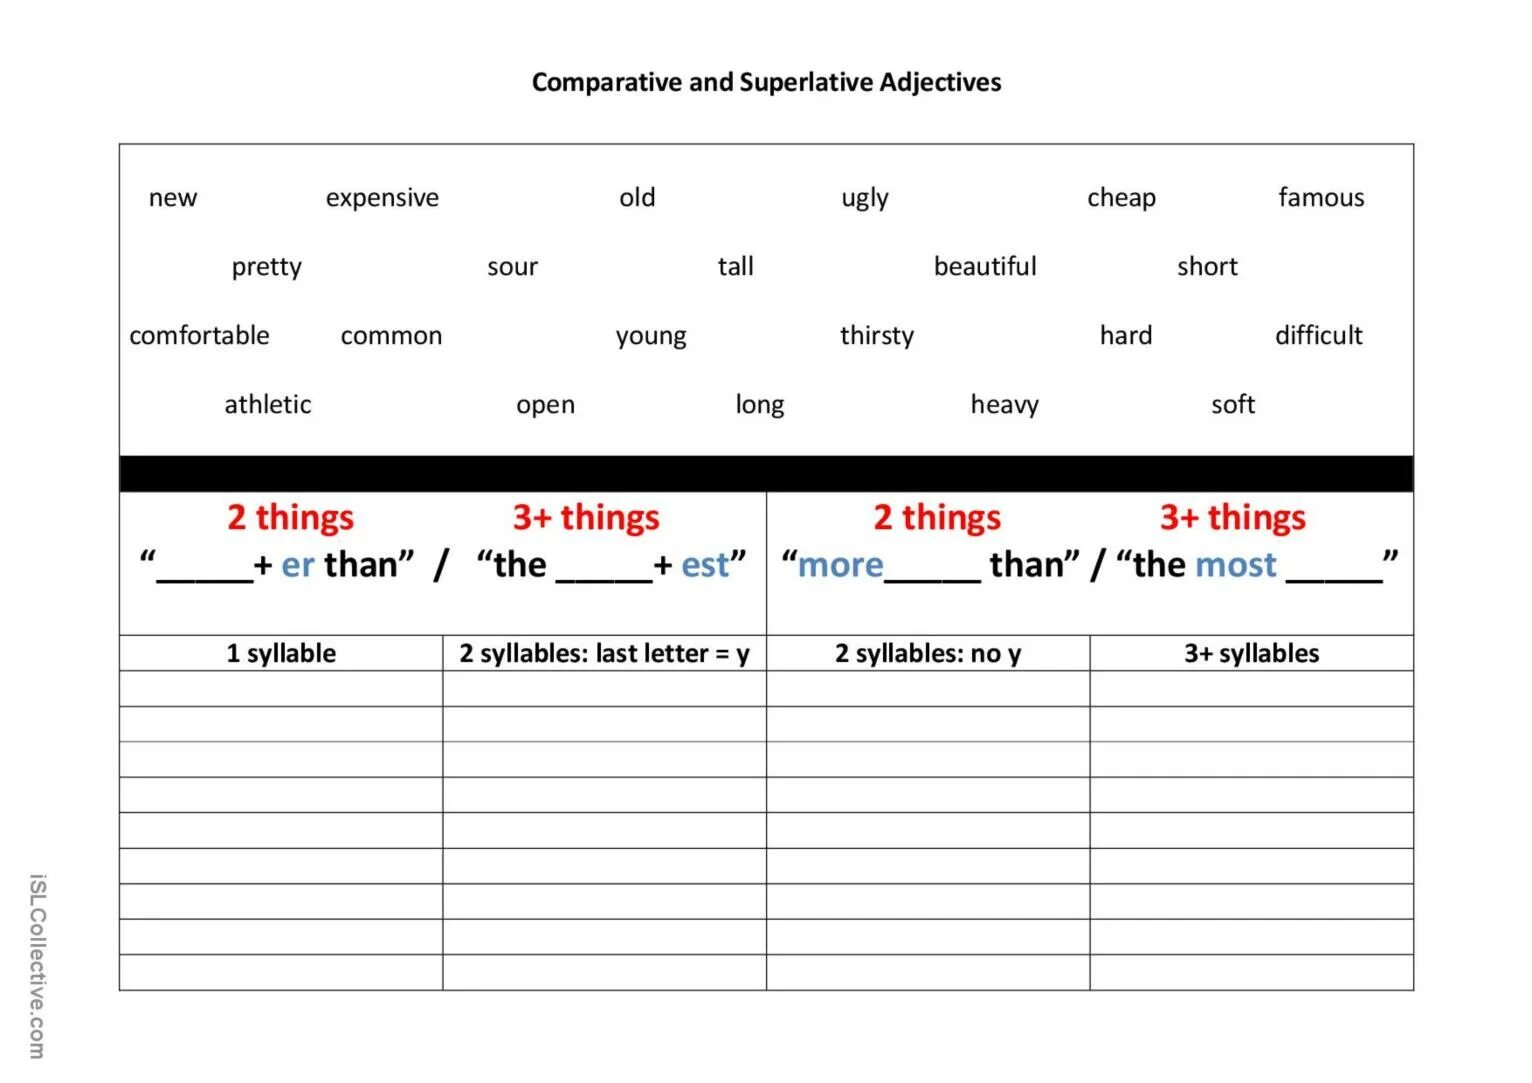 Comparative adjectives. Comparative and Superlative adjectives. Superlative adjectives Worksheets. Comparatives and Superlatives Worksheets. Adjective comparative superlative expensive